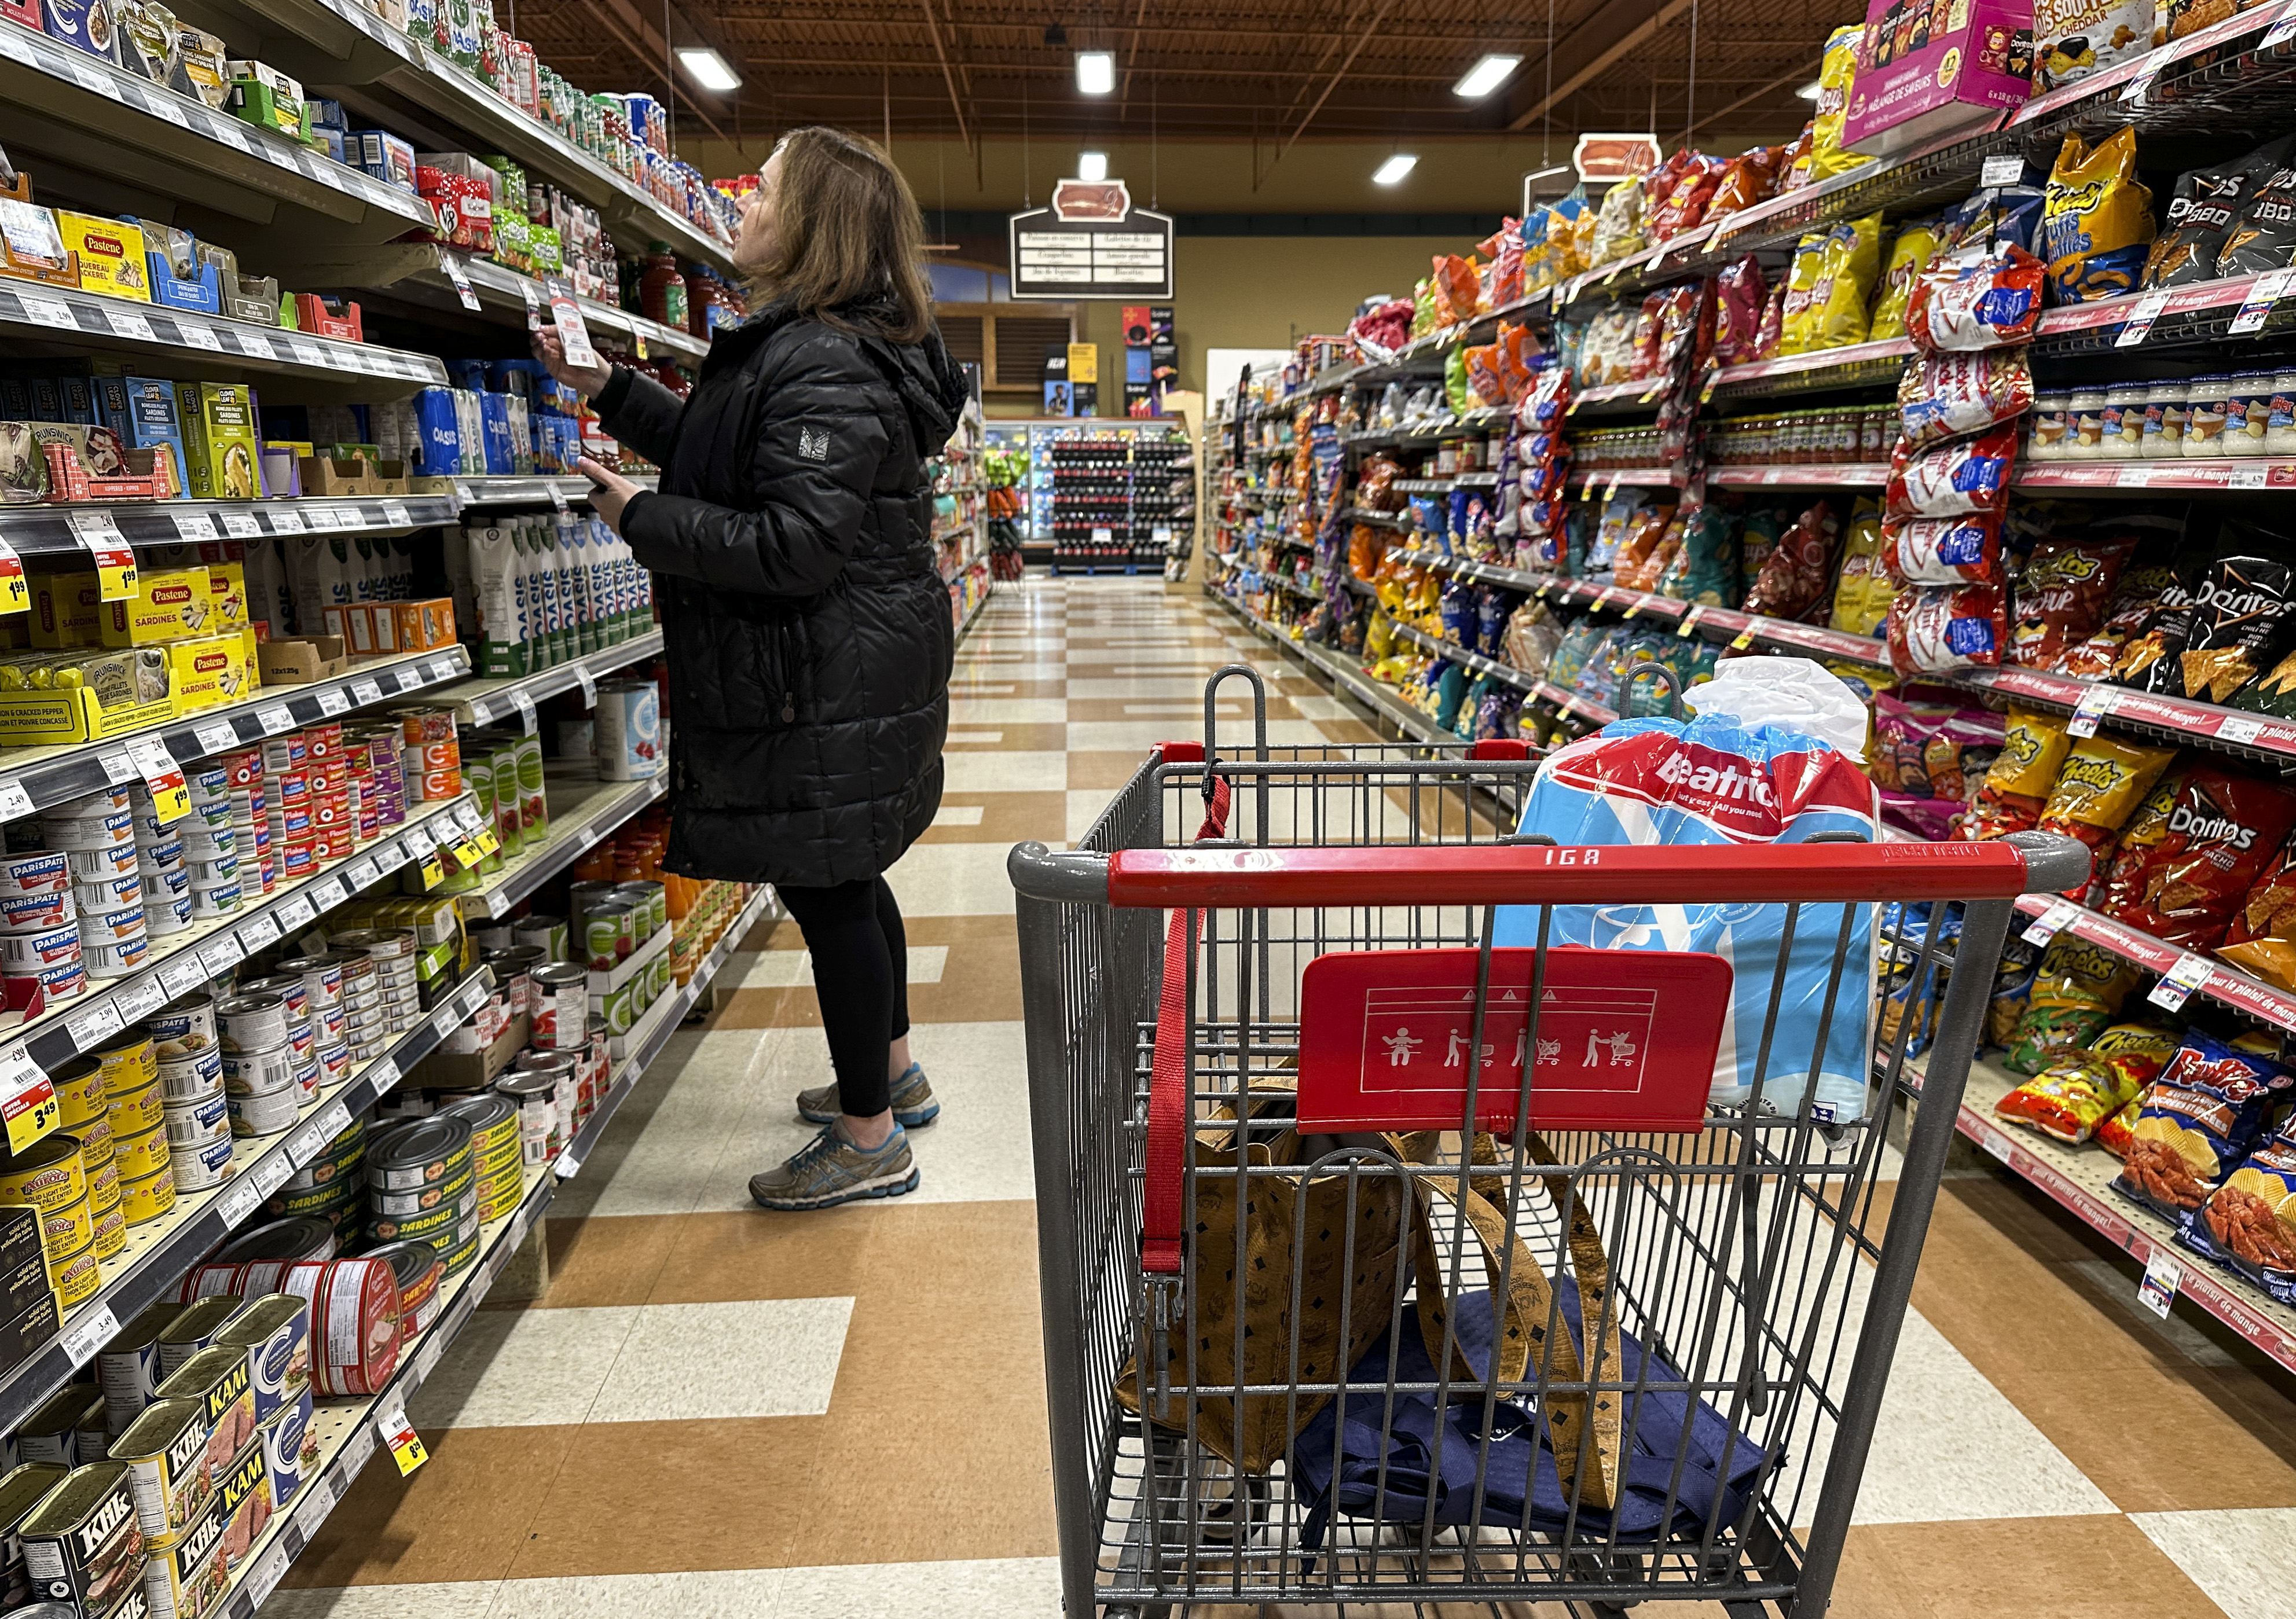 Why restrictive lease clauses could be hampering grocery competition in Canada